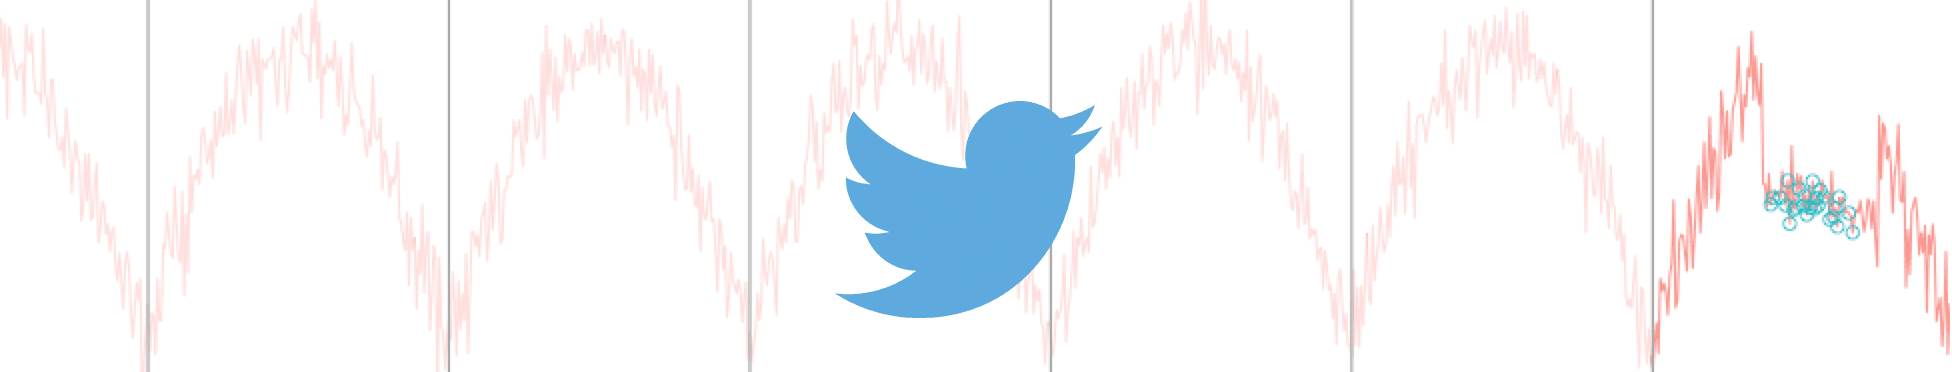 anomaly detection at Twitter